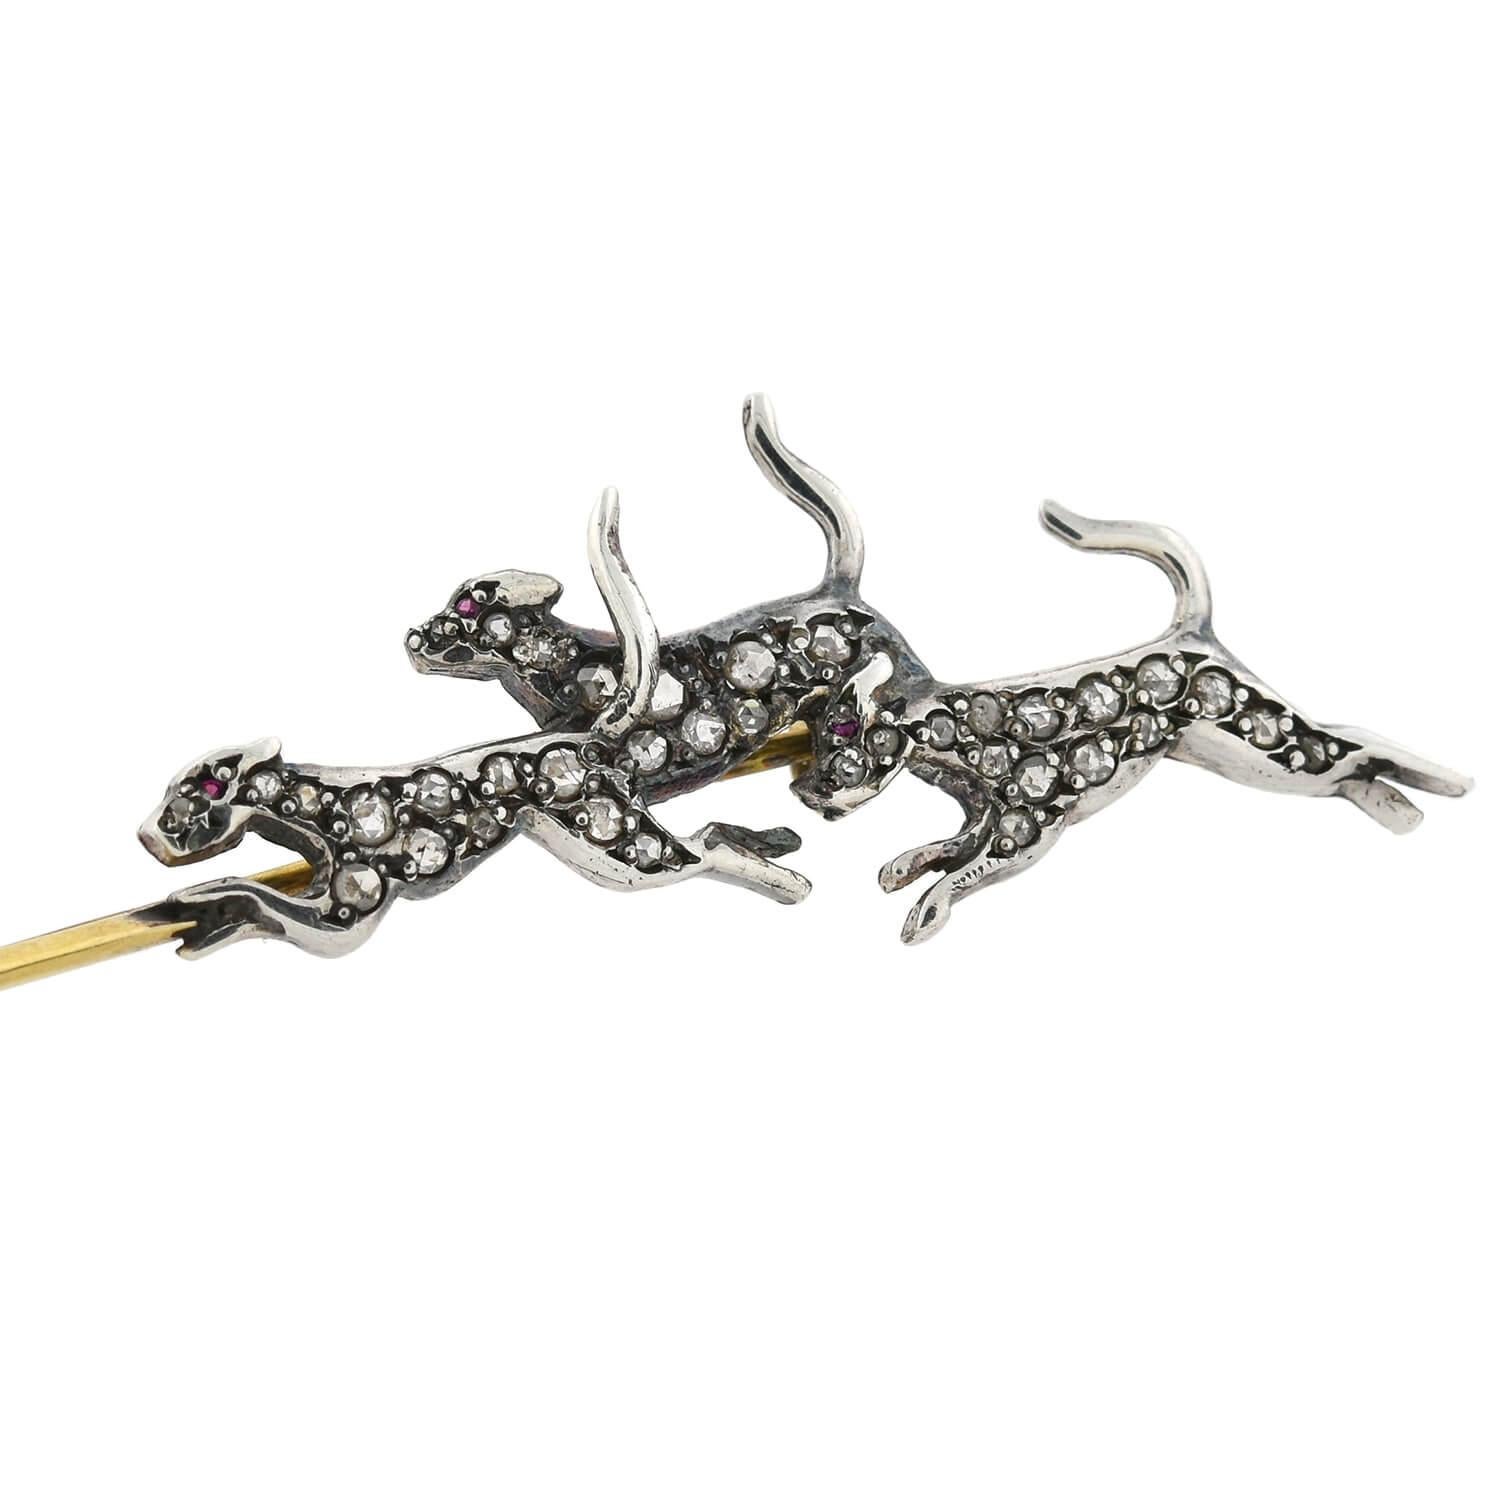 A unique pin from the Victorian (1880s) era! Crafted in 14kt yellow gold topped with sterling silver, this sport-inspired piece features a fox being chased by three hunting hounds. The sterling topped animals appear in motion, with the fox at one